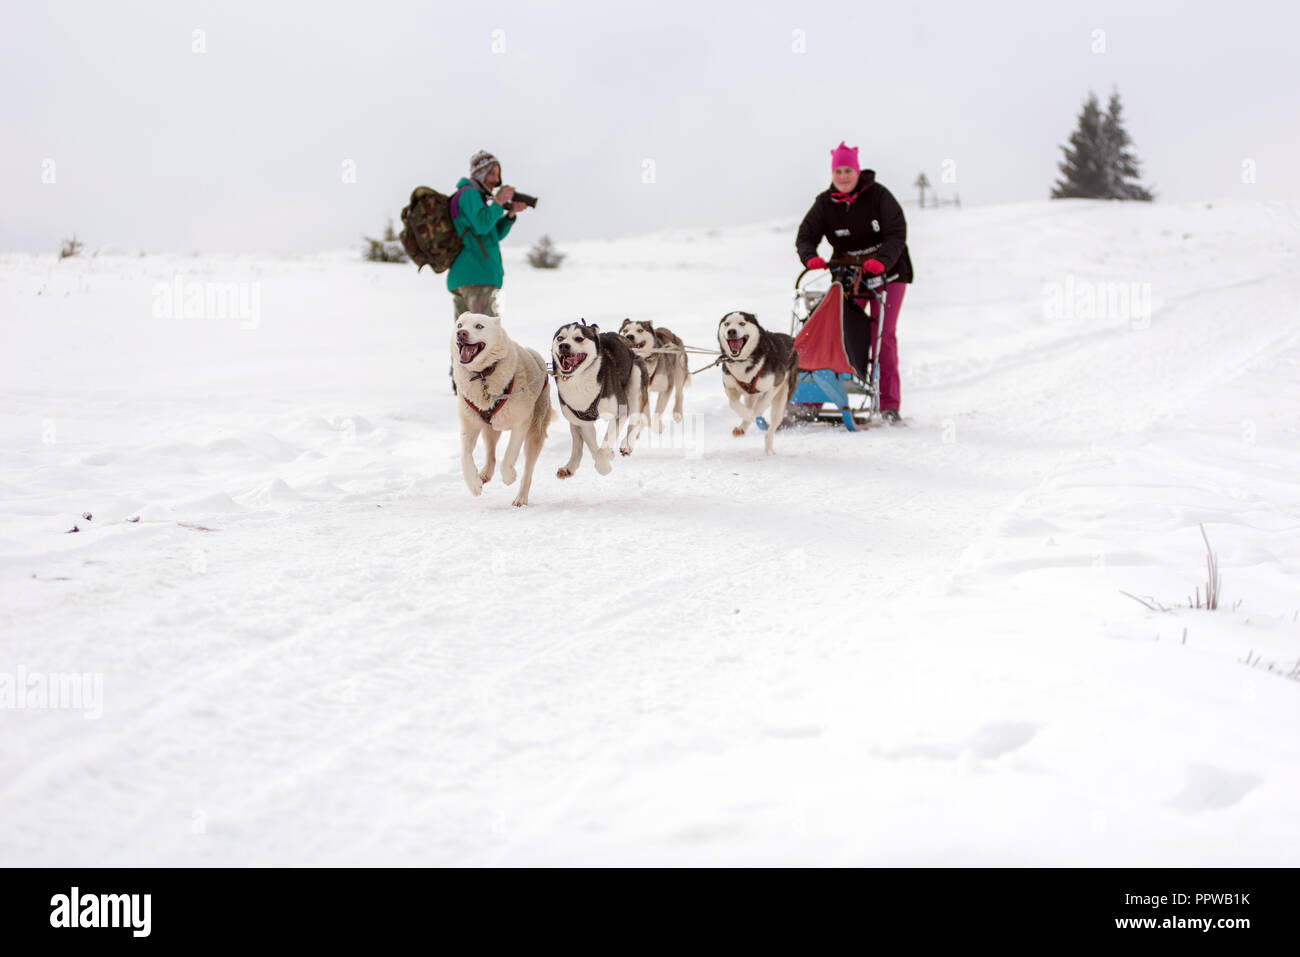 BELIS, ROMANIA - FEBRUARY 17, 2018: Musher racing at a public dog sled race show with husky dogs in the Transylvanian mountains Stock Photo